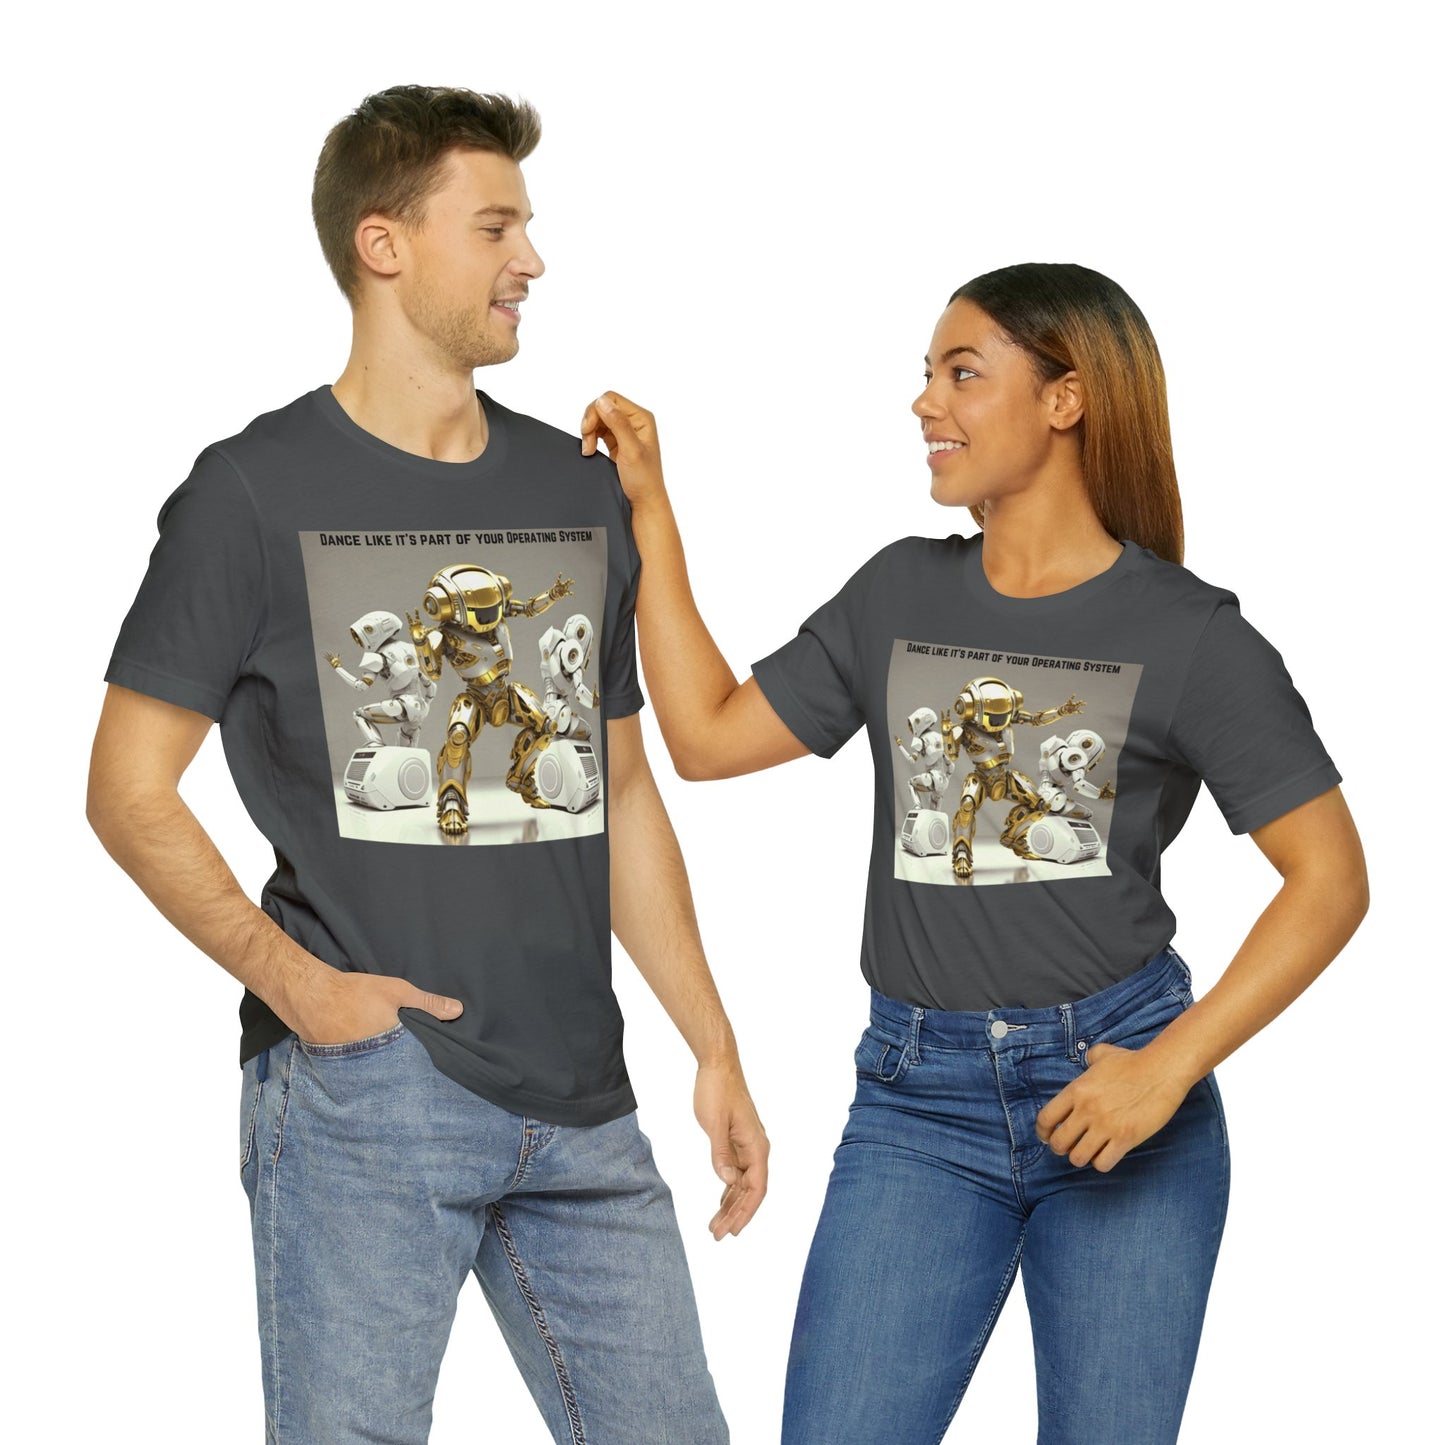 Dancing Robot | Tee | Party Gift | Rave | Techno | House Music | Hip Hop | Fun | Unisex | Men's | Women's | HD Graphics | All Ages | Cool | T-Shirt